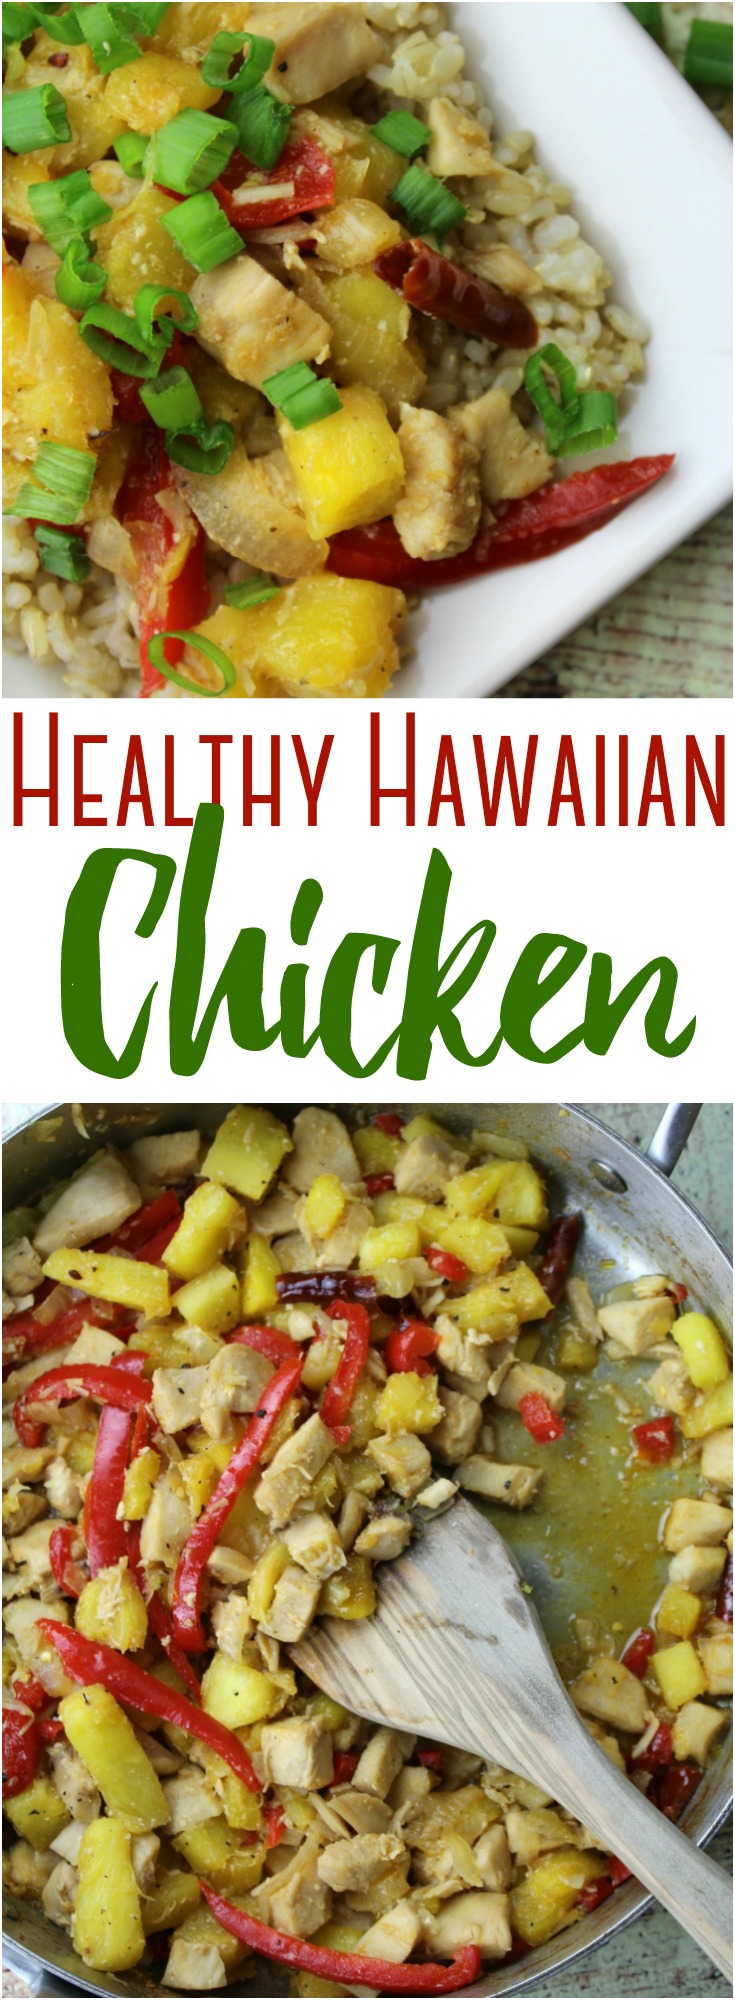 Simple, healthy ingredients come together quickly and easily in this healthy Hawaiian Chicken recipe - perfect on rice, cauliflower rice or just on it's own!
